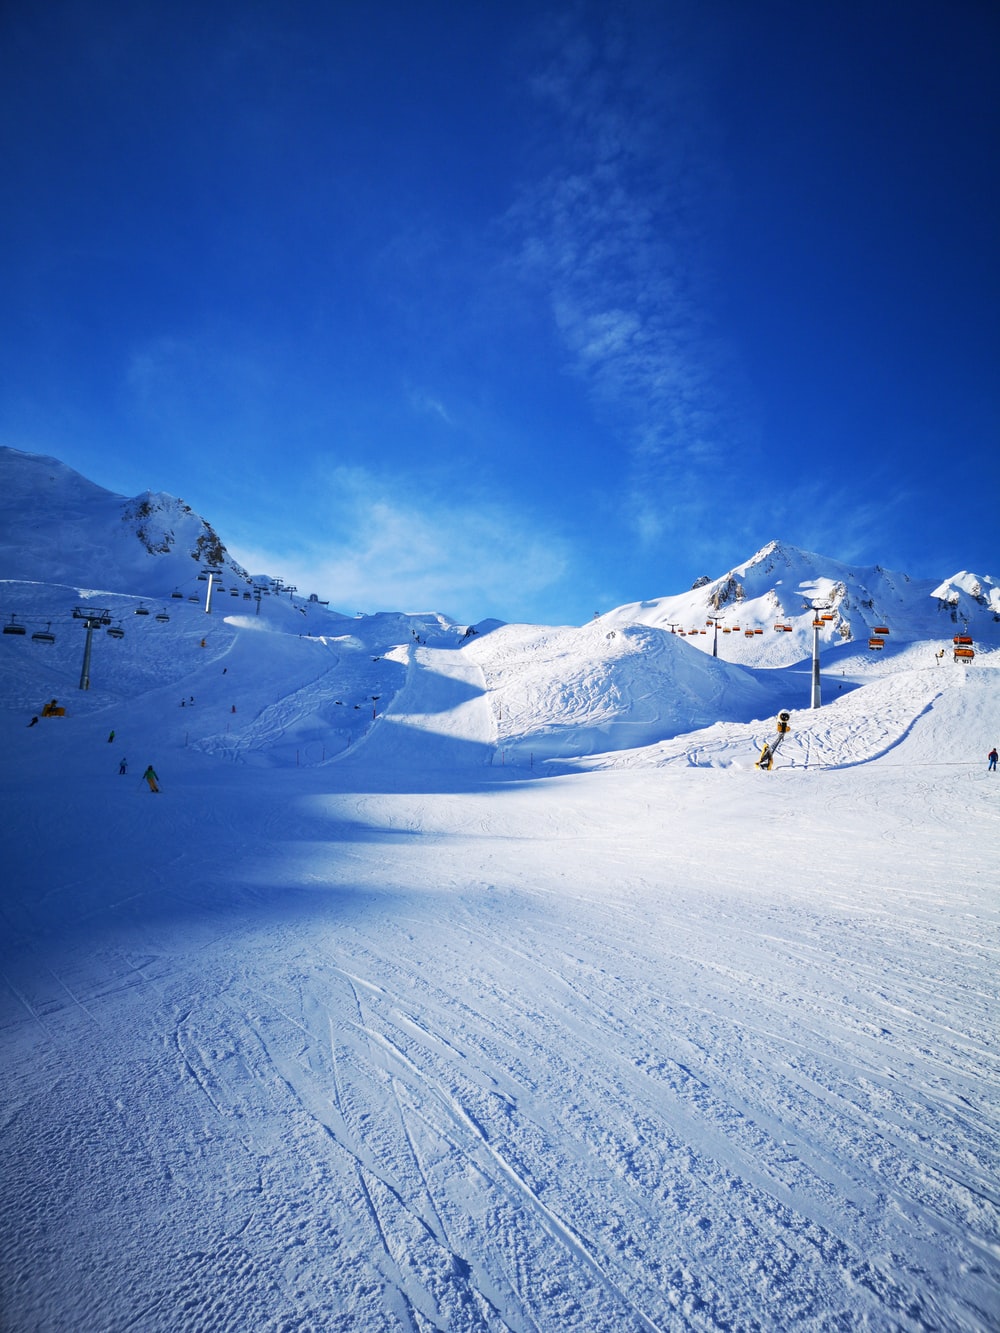 Blue Snow Picture. Download Free Image